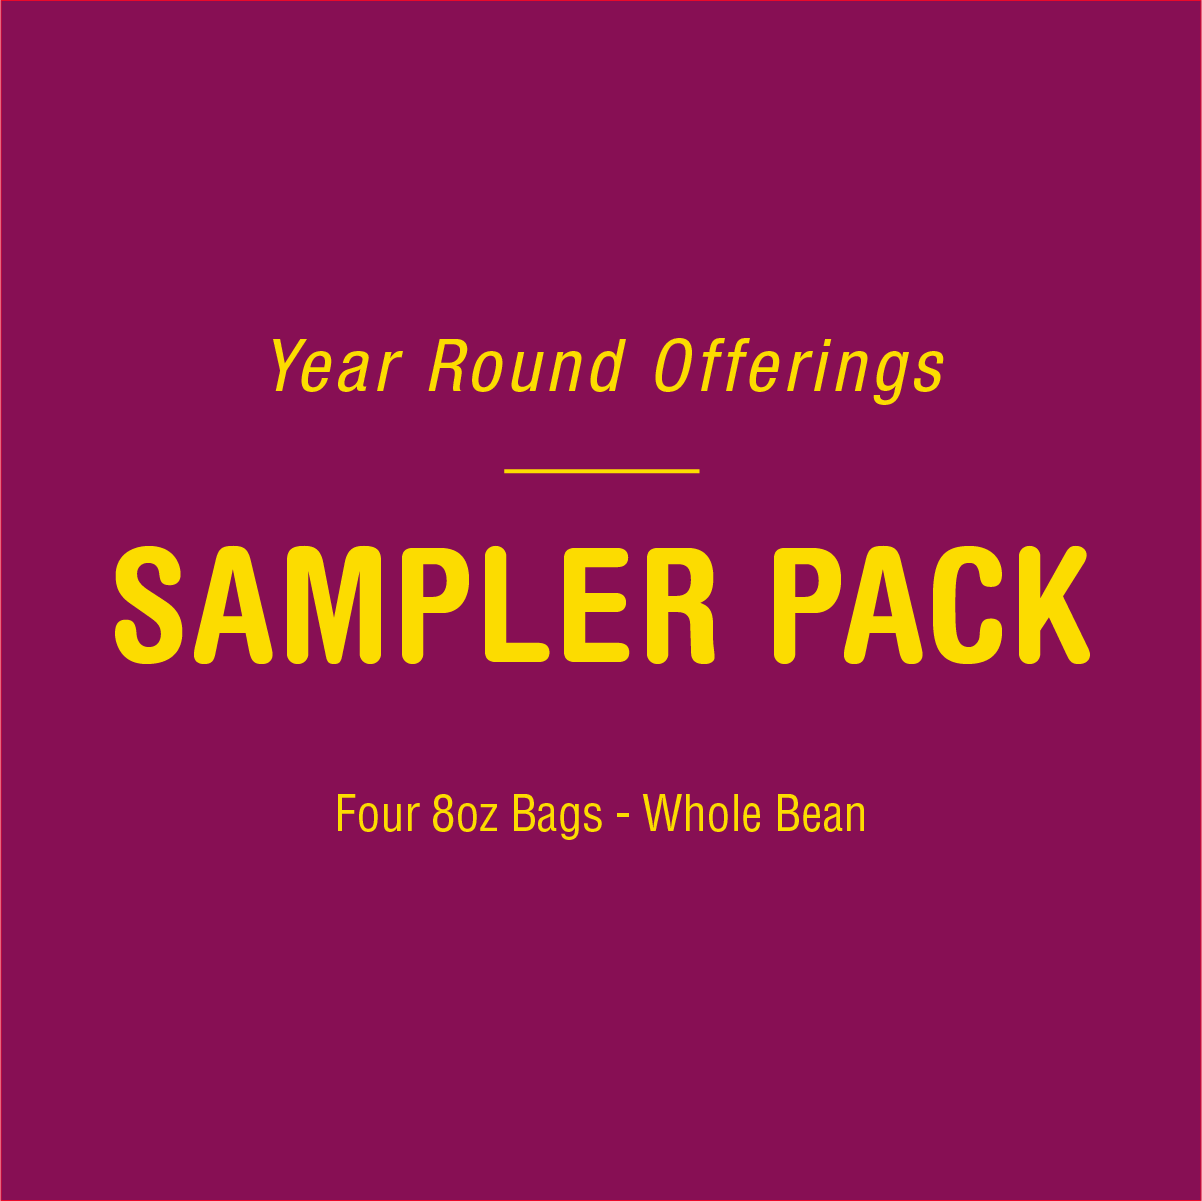 A promotional graphic on a deep maroon background with text that reads "Time and Temperature Blend, Tandem Coffee Roasters Year Round Offerings Sampler Pack, four 8oz bags - whole bean" in bold white and yellow.